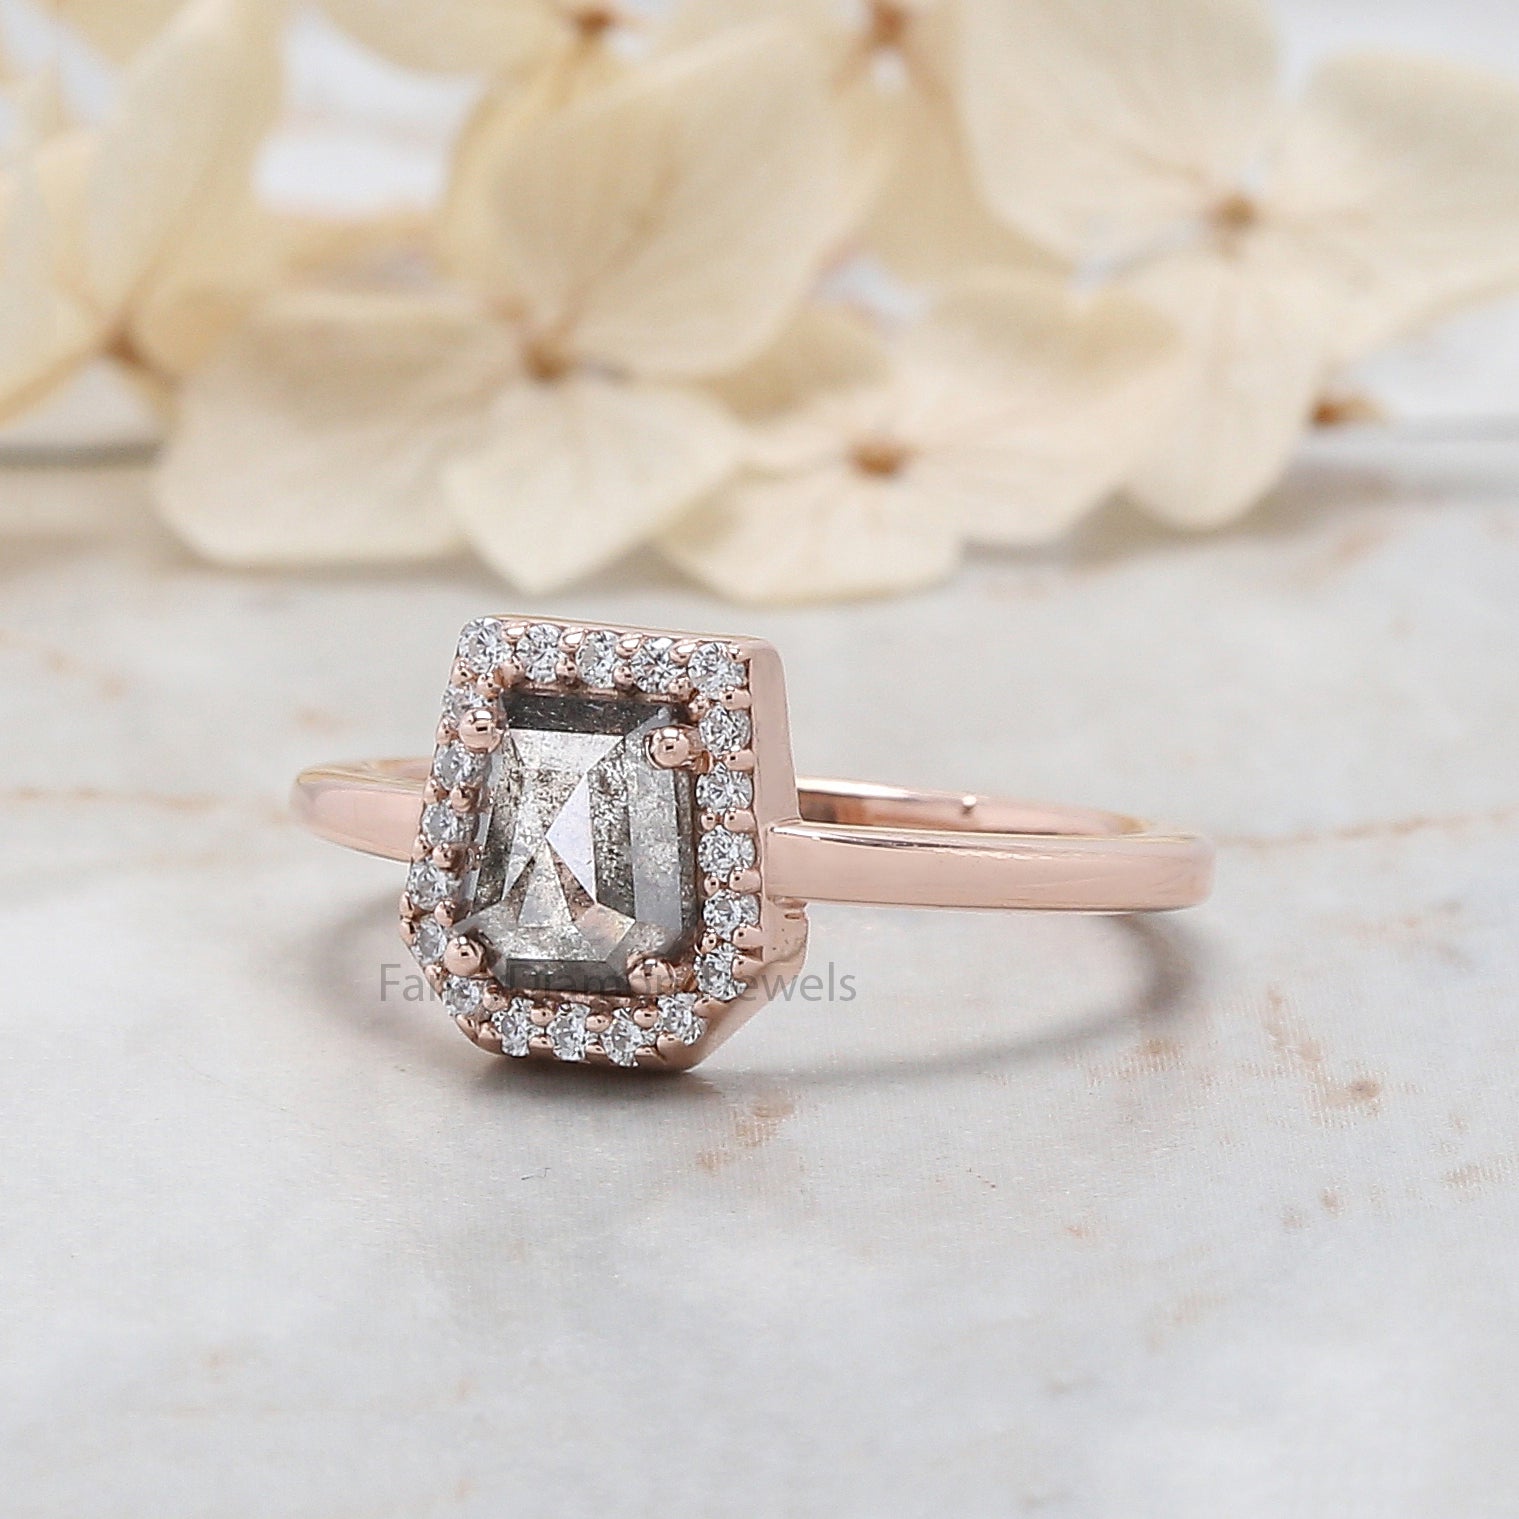 Coffin Cut Salt And Pepper Diamond Ring 0.96 Ct 6.25 MM Coffin Diamond Ring 14K Solid Rose Gold Silver Engagement Ring Gift For Her QN1097